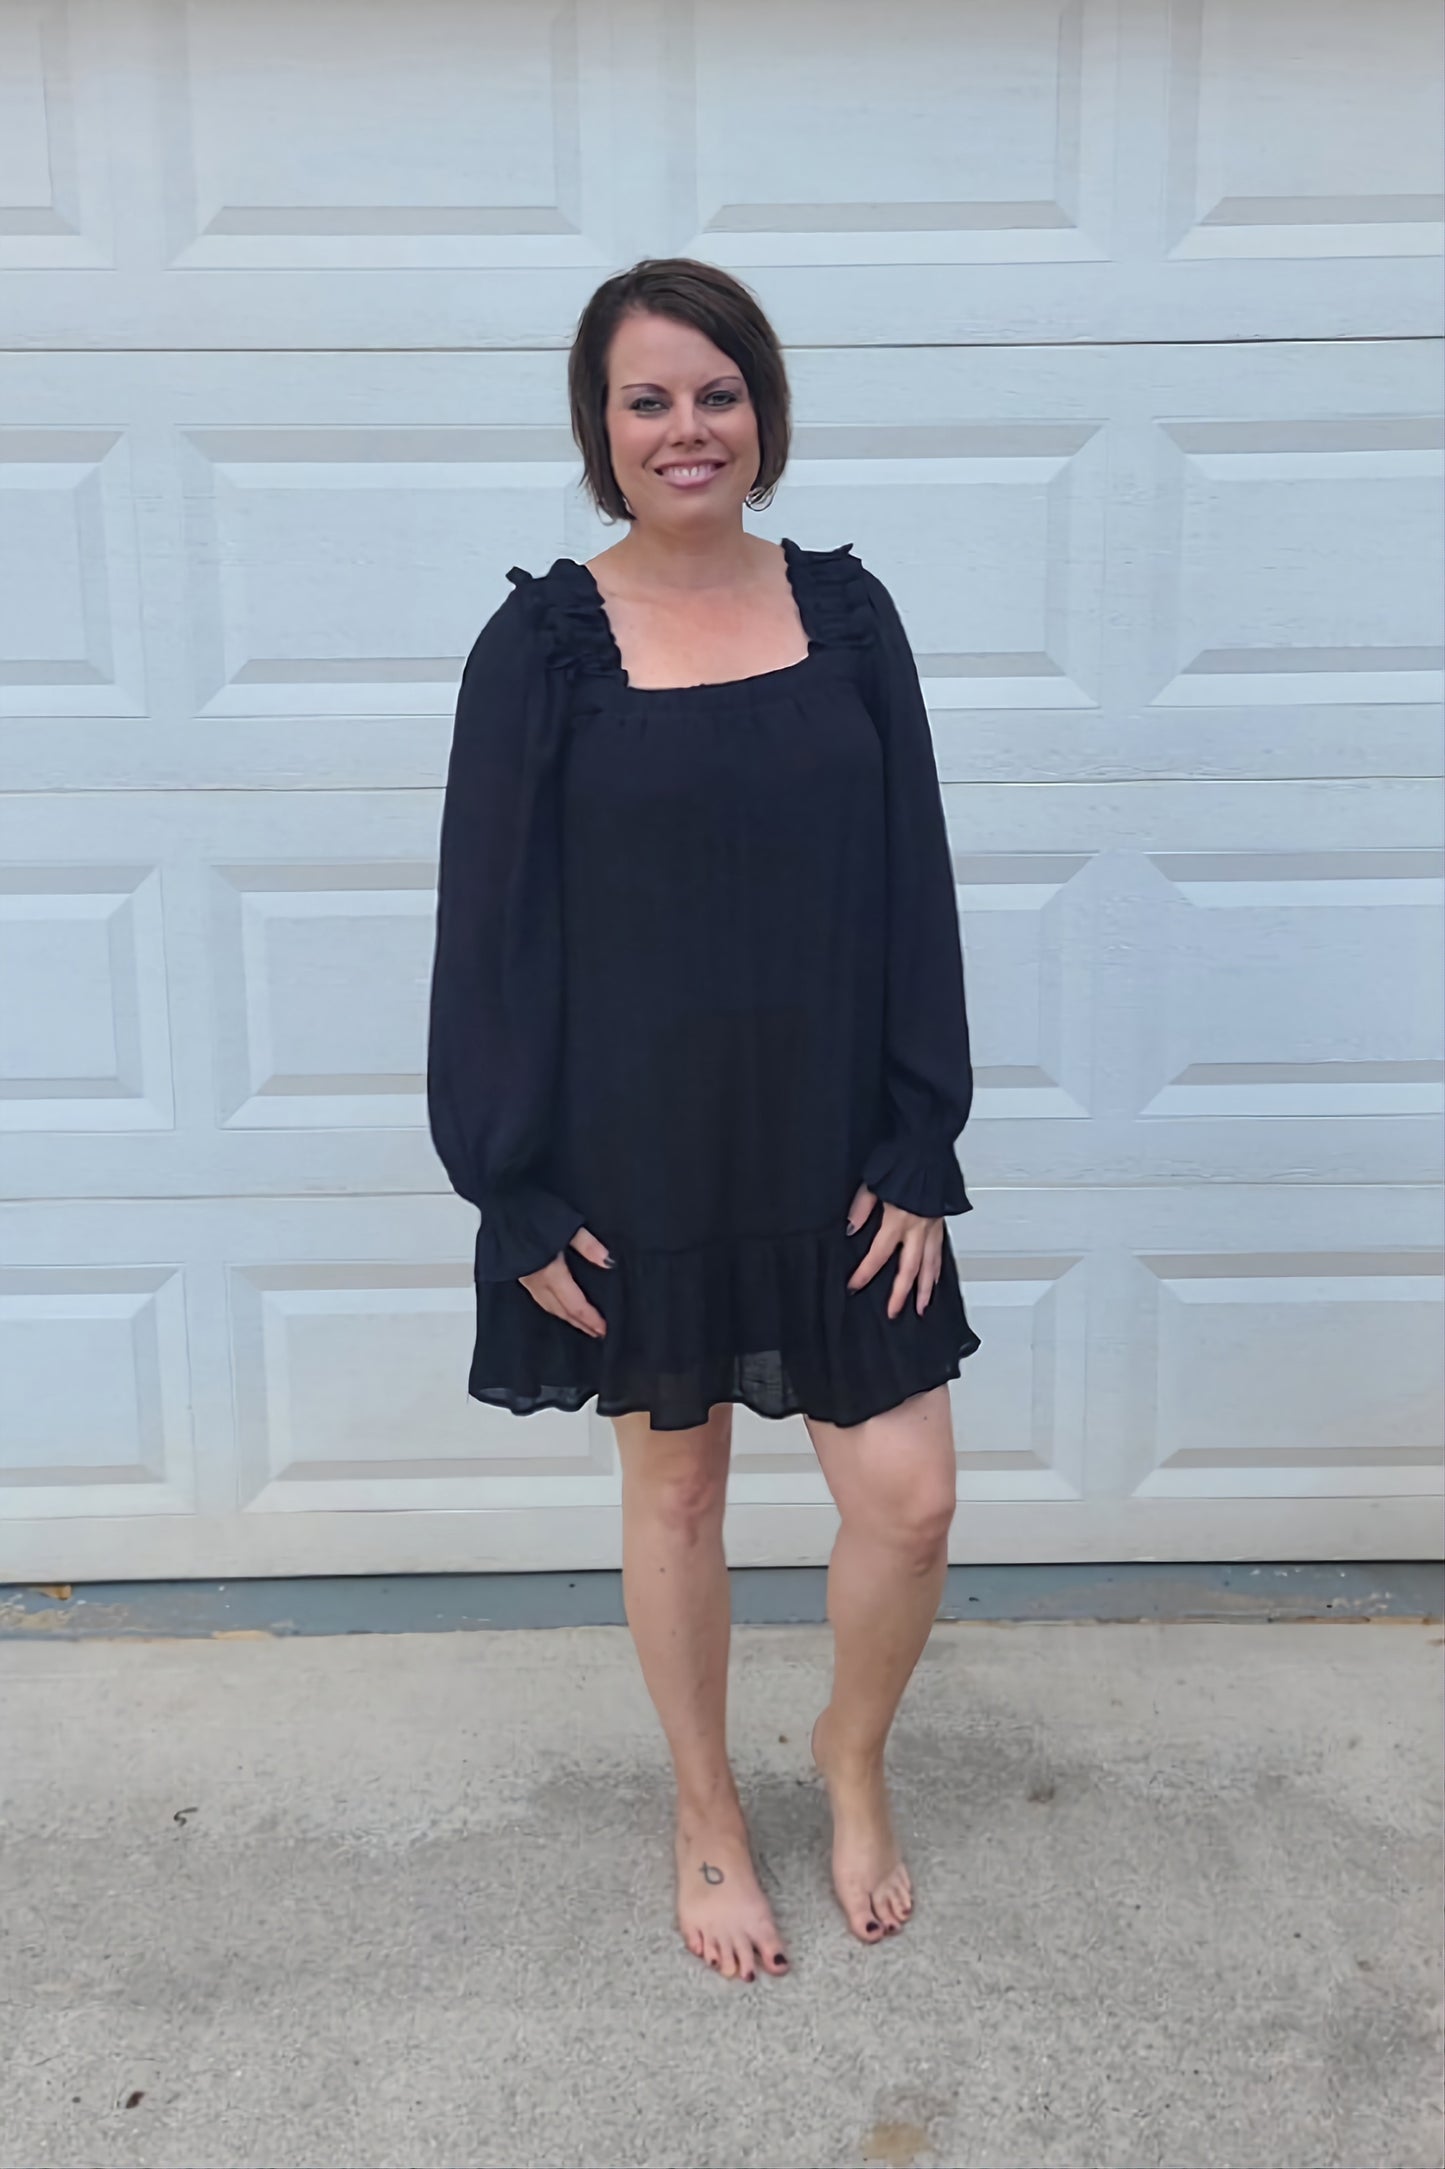 You'll look and feel beautiful in our new Black Mini Dress! This mini-length dress features a square neckline, long sleeves with elastic at the wrist, tiered hemline, back tie, ruffle detail, and it is lined.